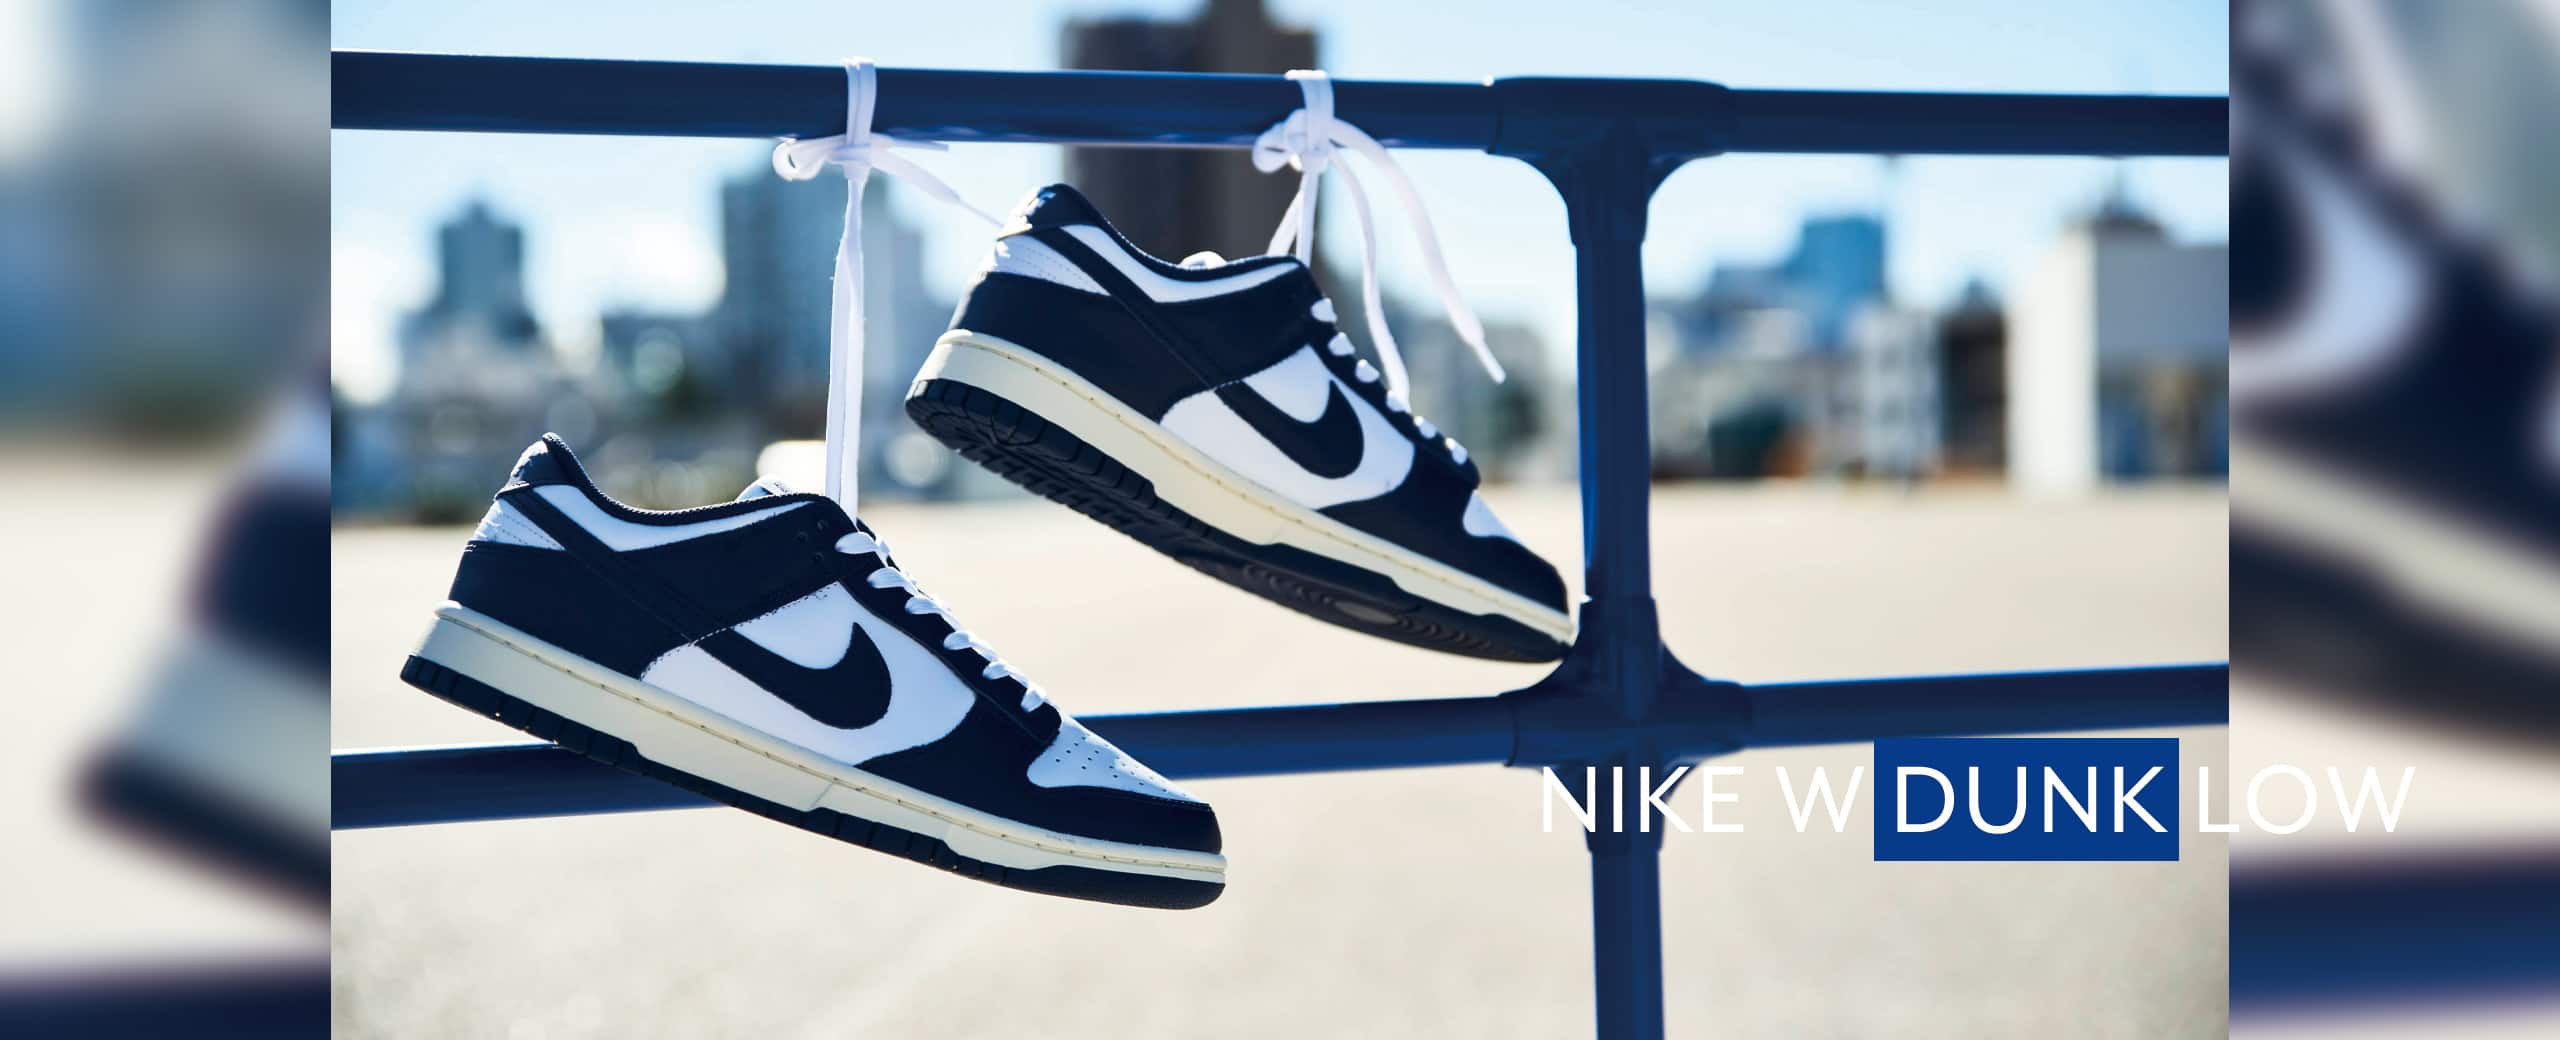 "NIKE W DUNK LOW AGED NAVY"